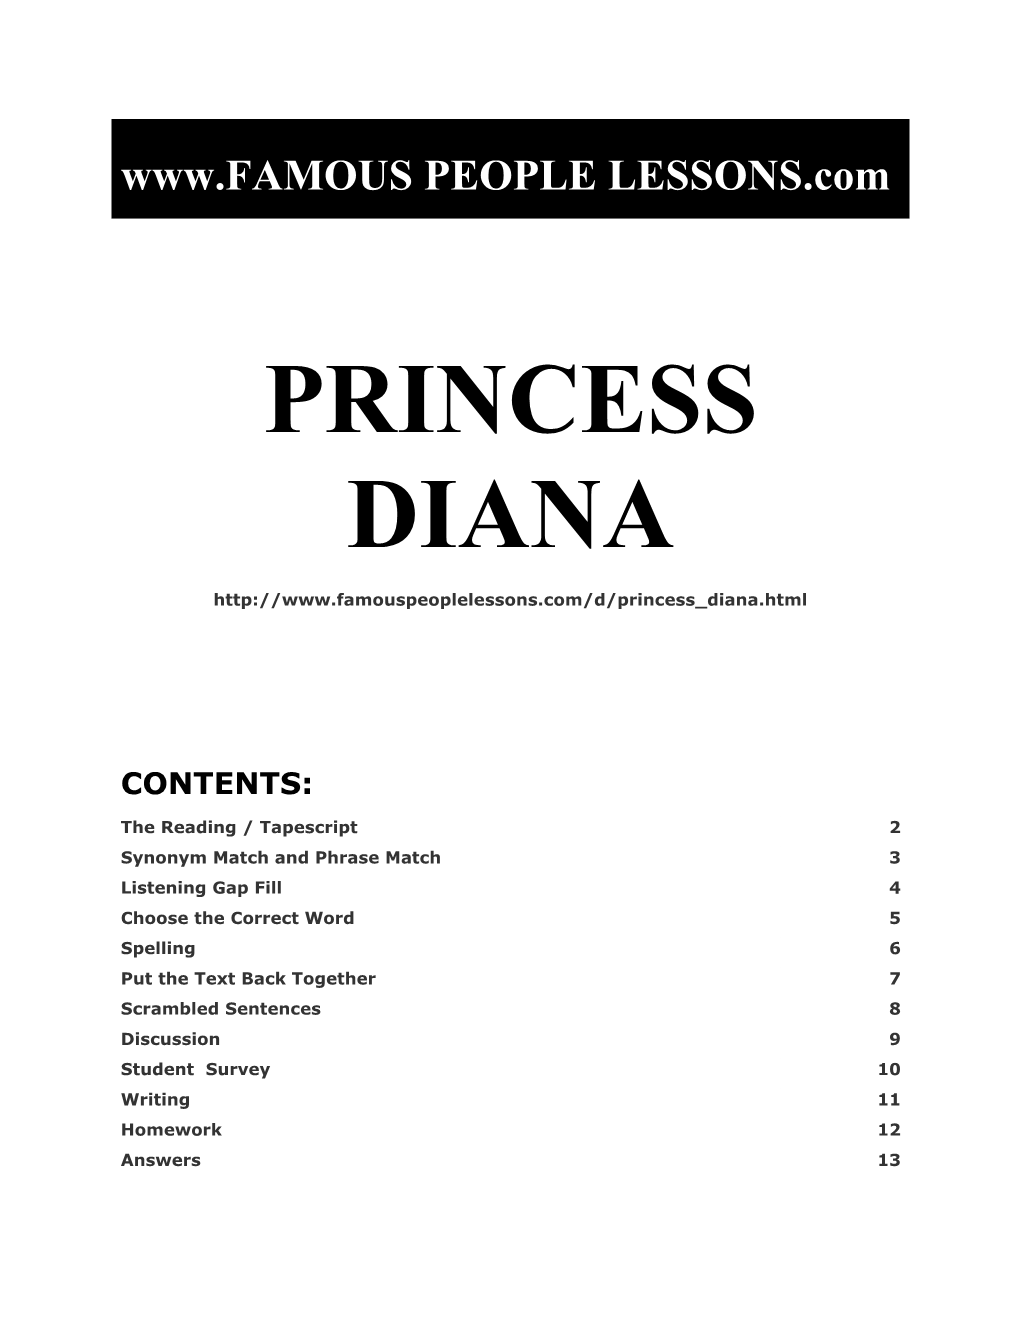 Famous People Lessons - Princess Diana